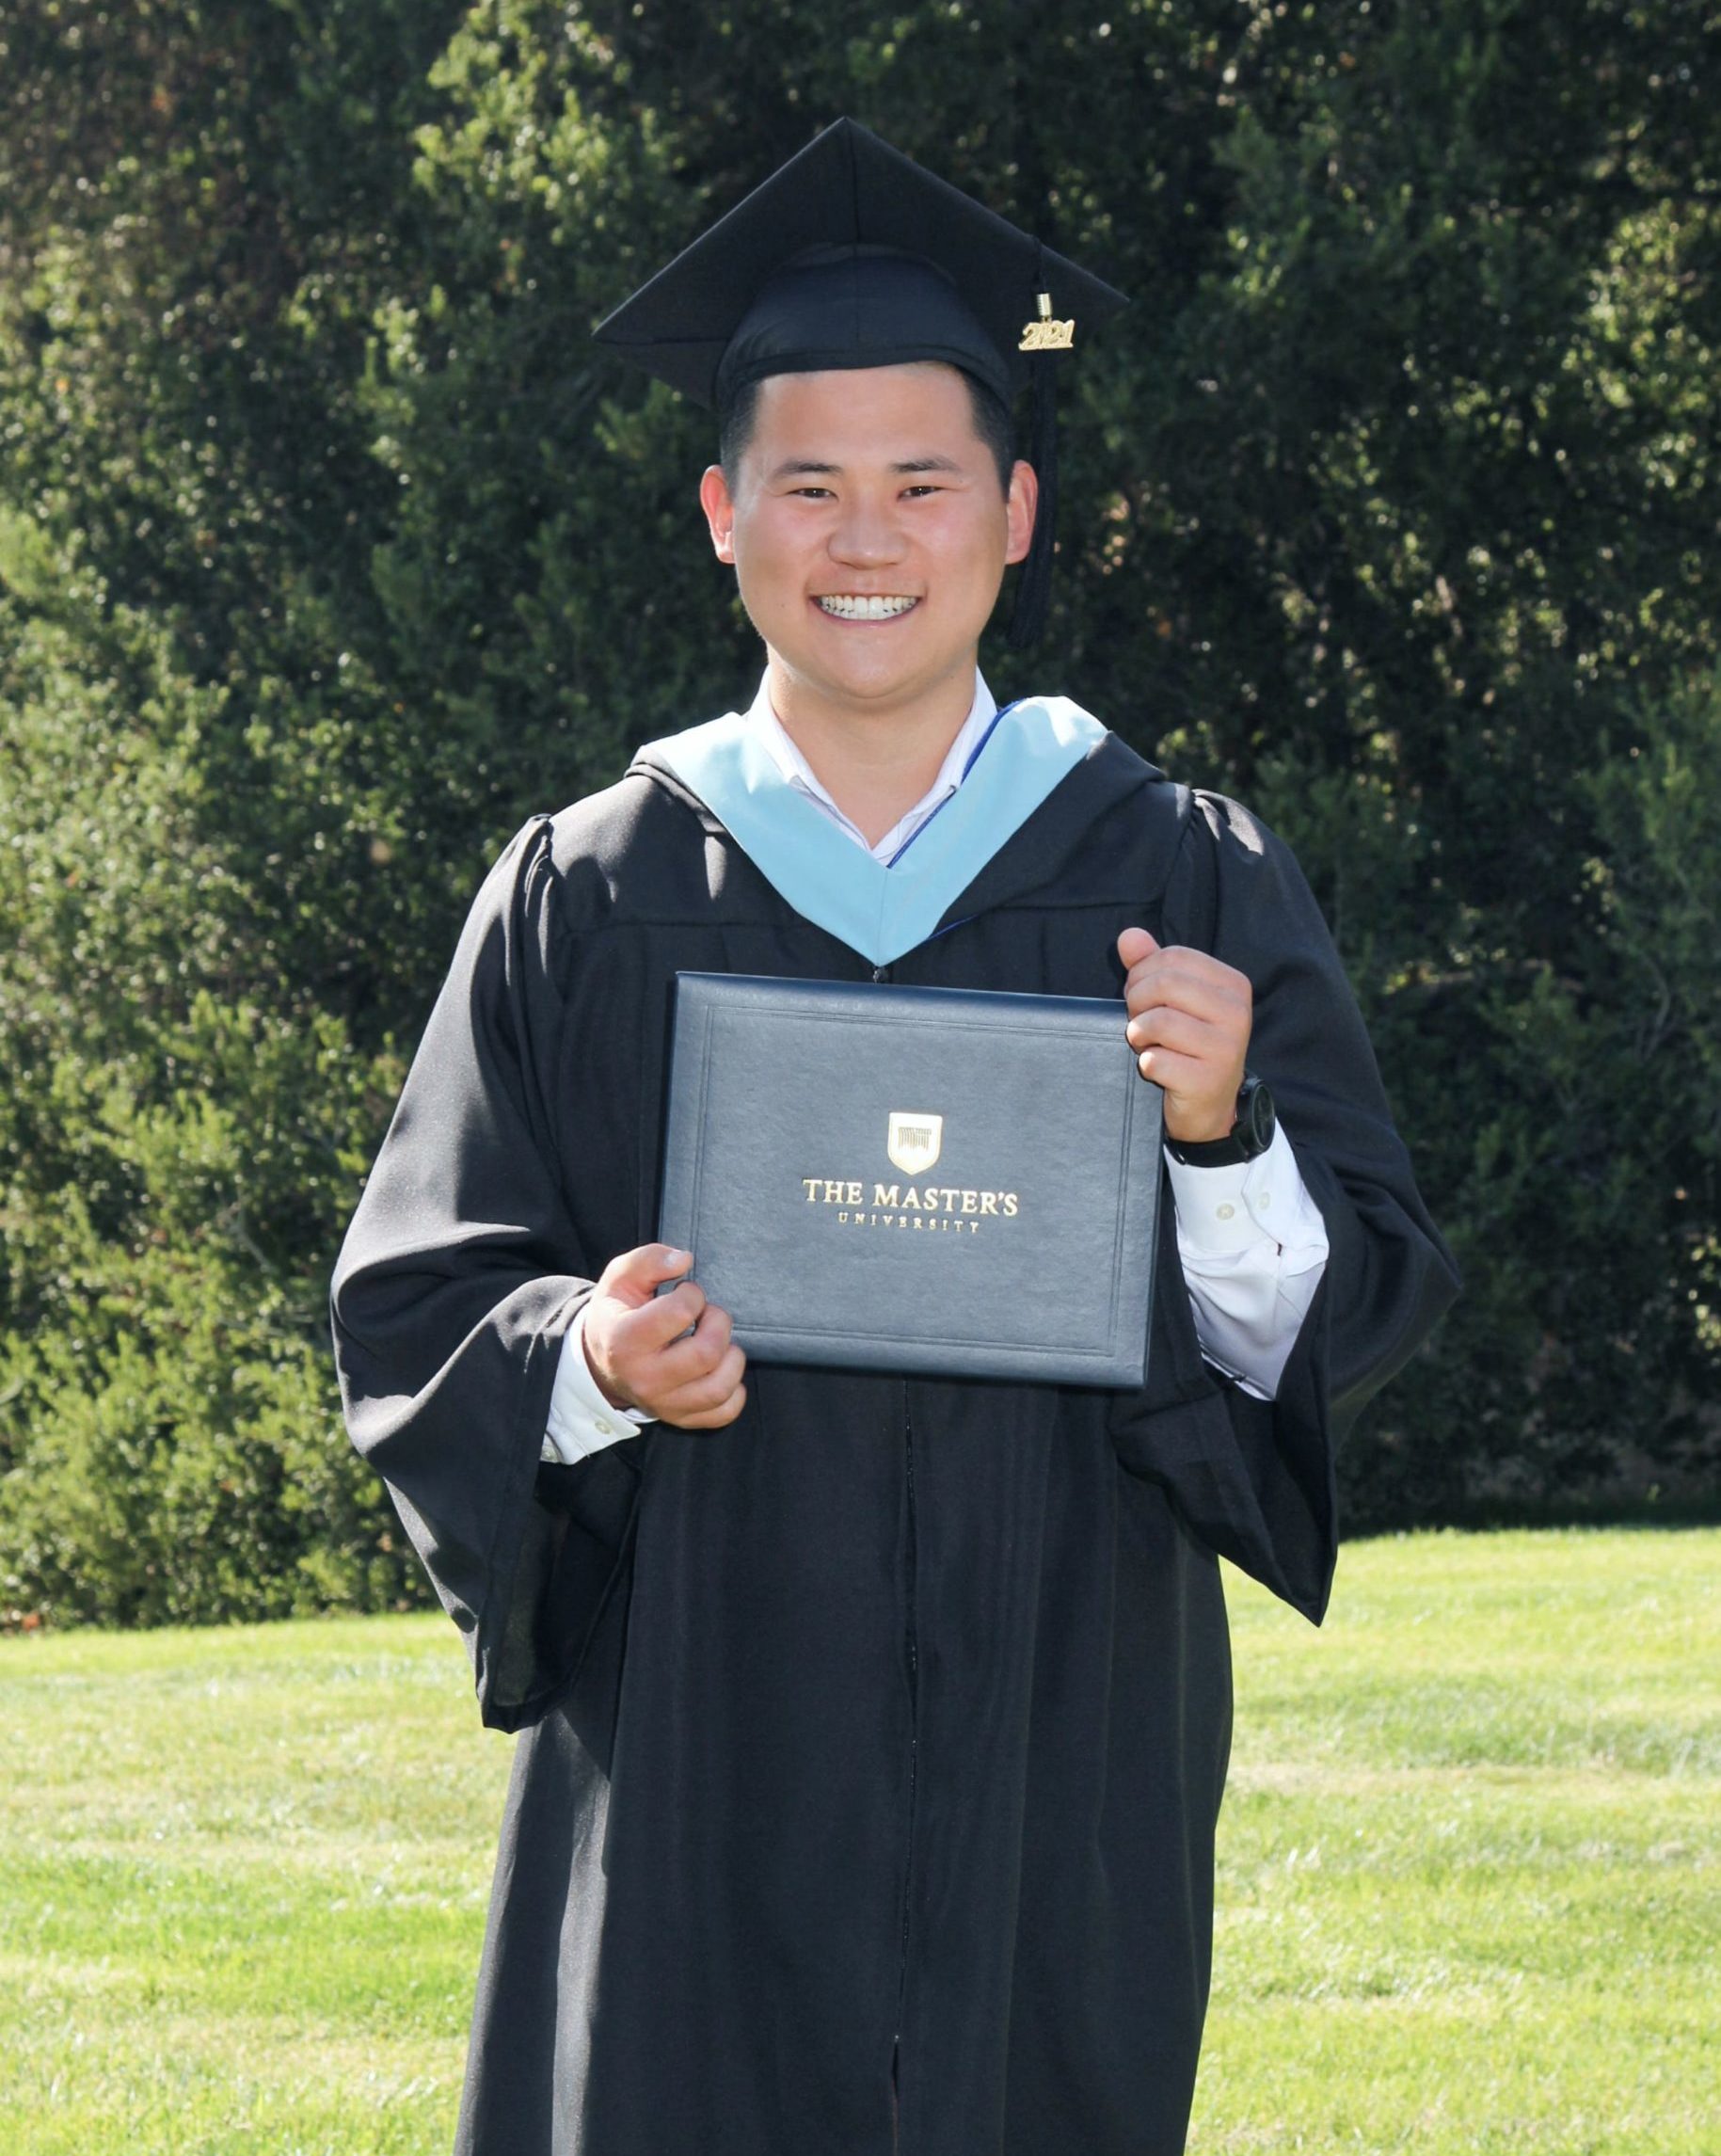 smiling man wearing black graduation cap and gown light blue masters cape and holding diploma